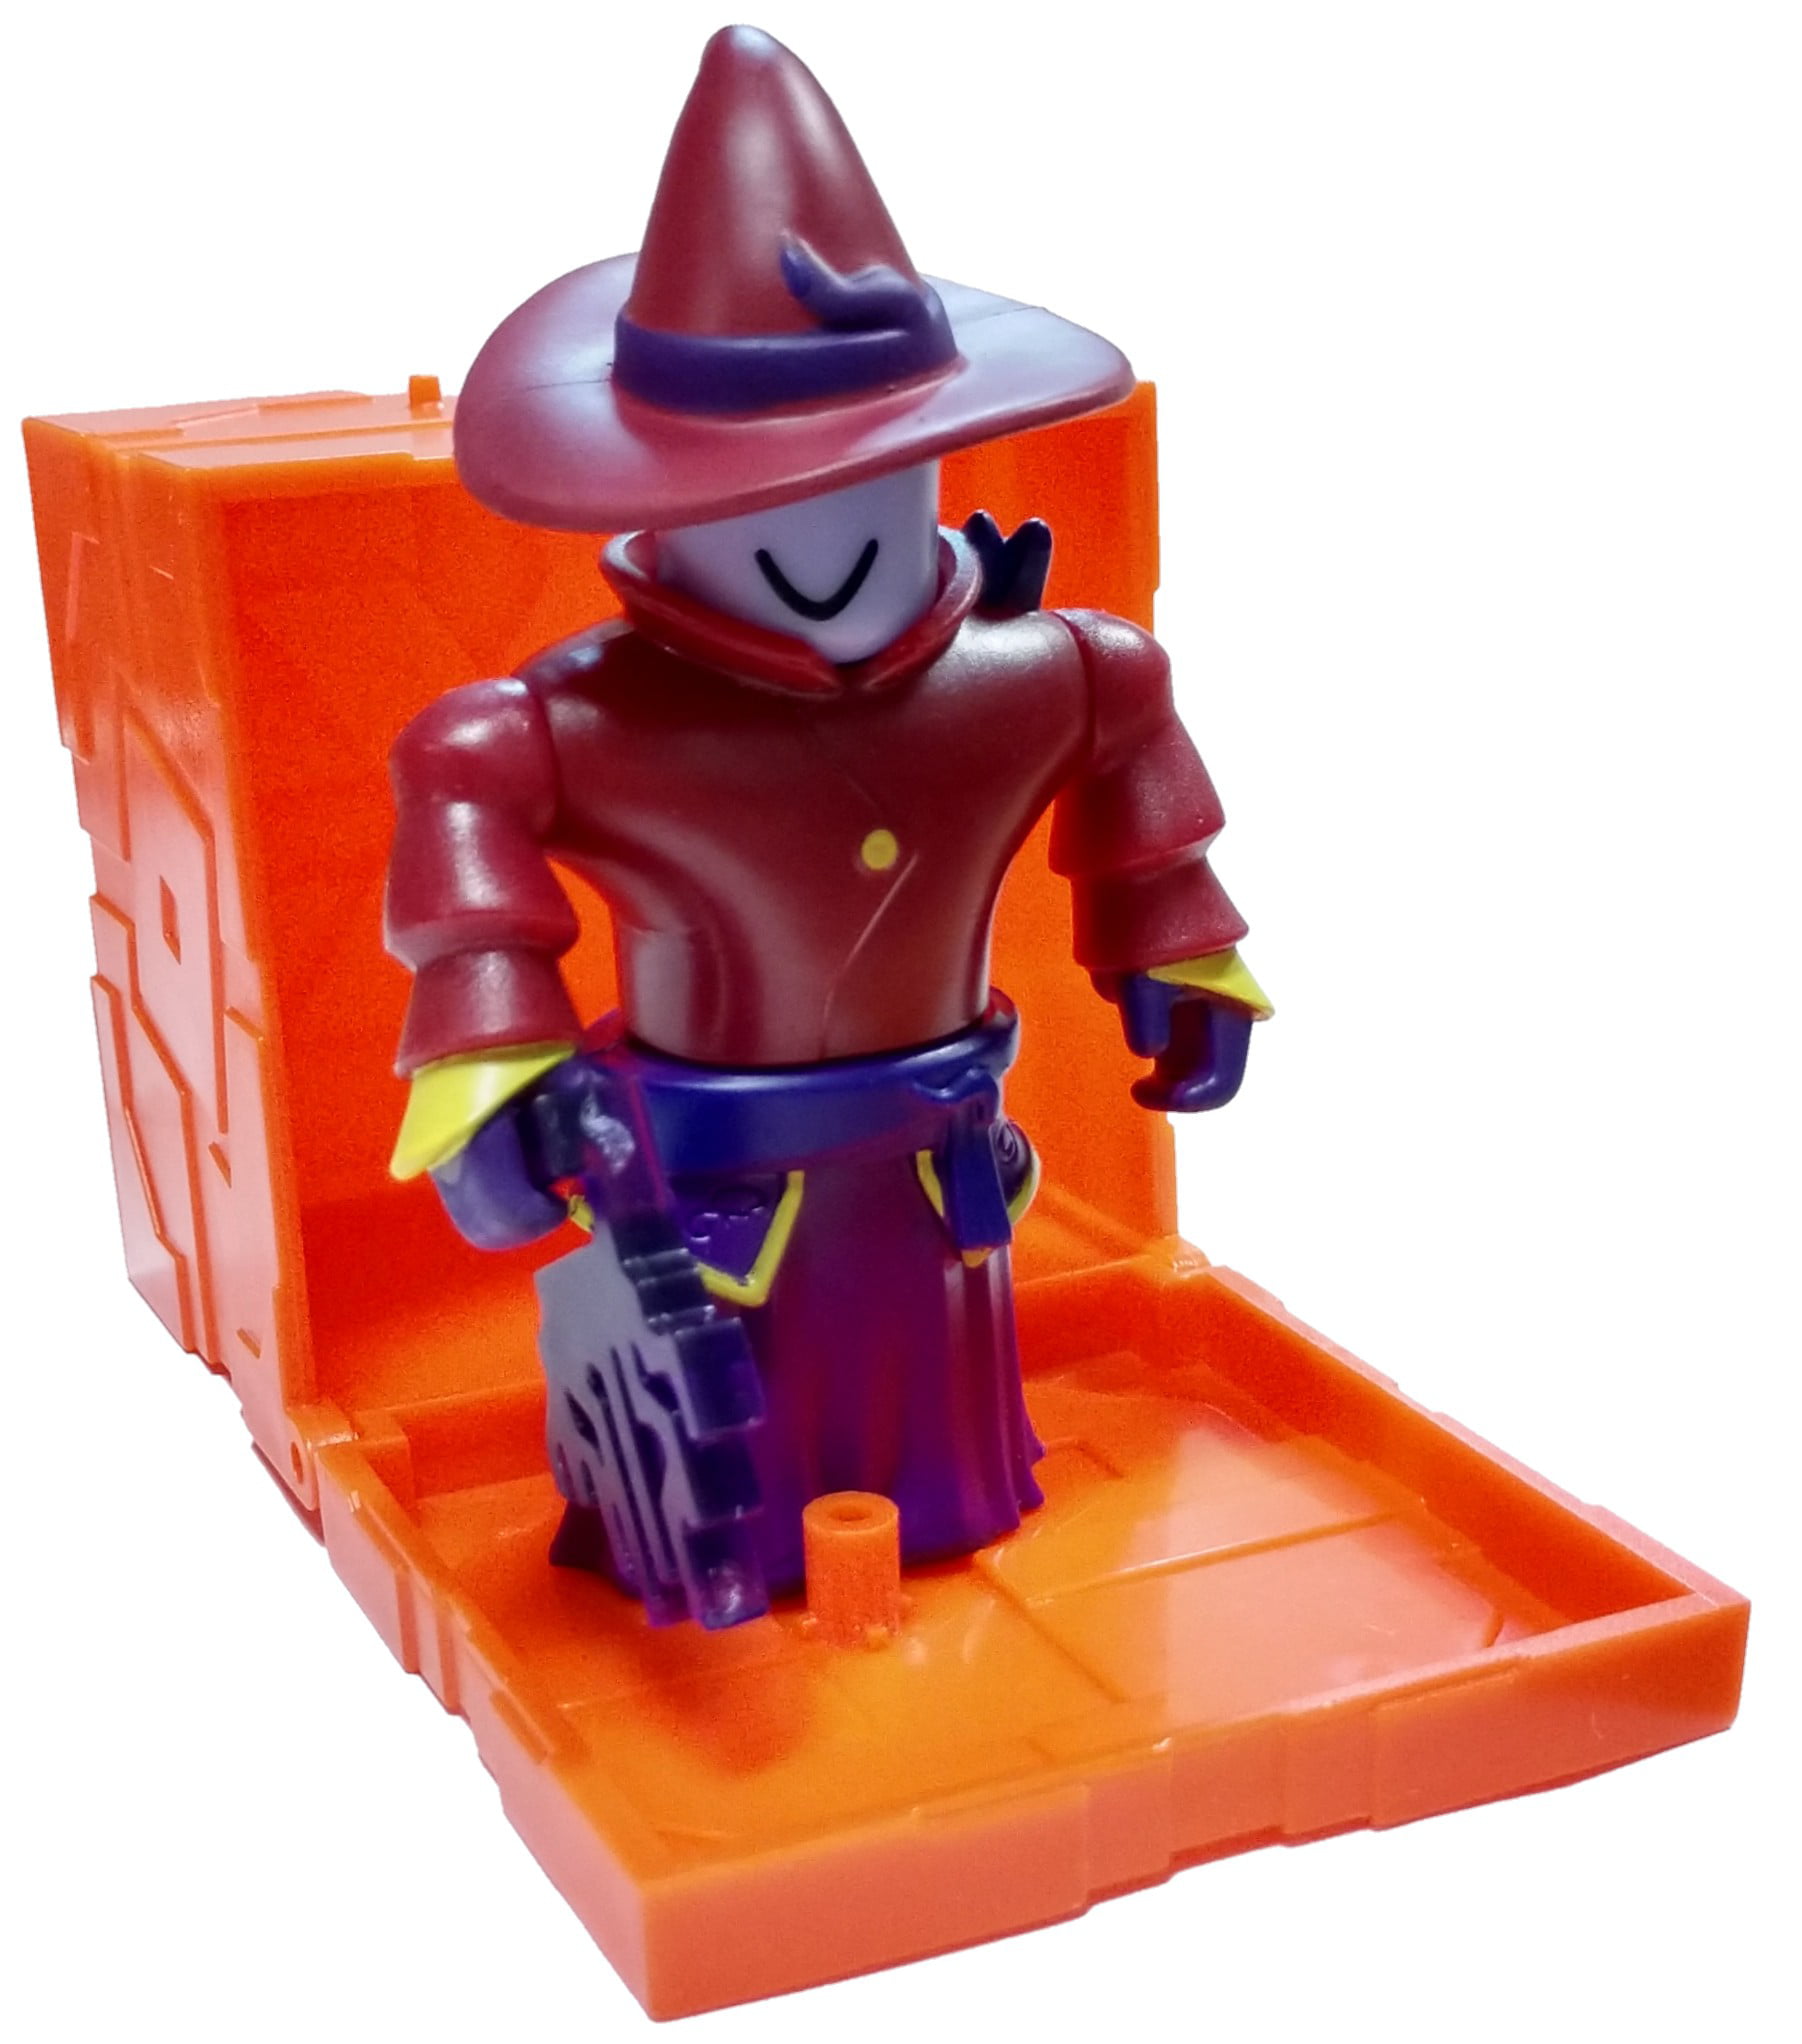 Roblox Series 6 Dread Dark Wizard Mini Figure With Orange Cube And Online Code No Packaging Walmart Com Walmart Com - roblox dark hand mask